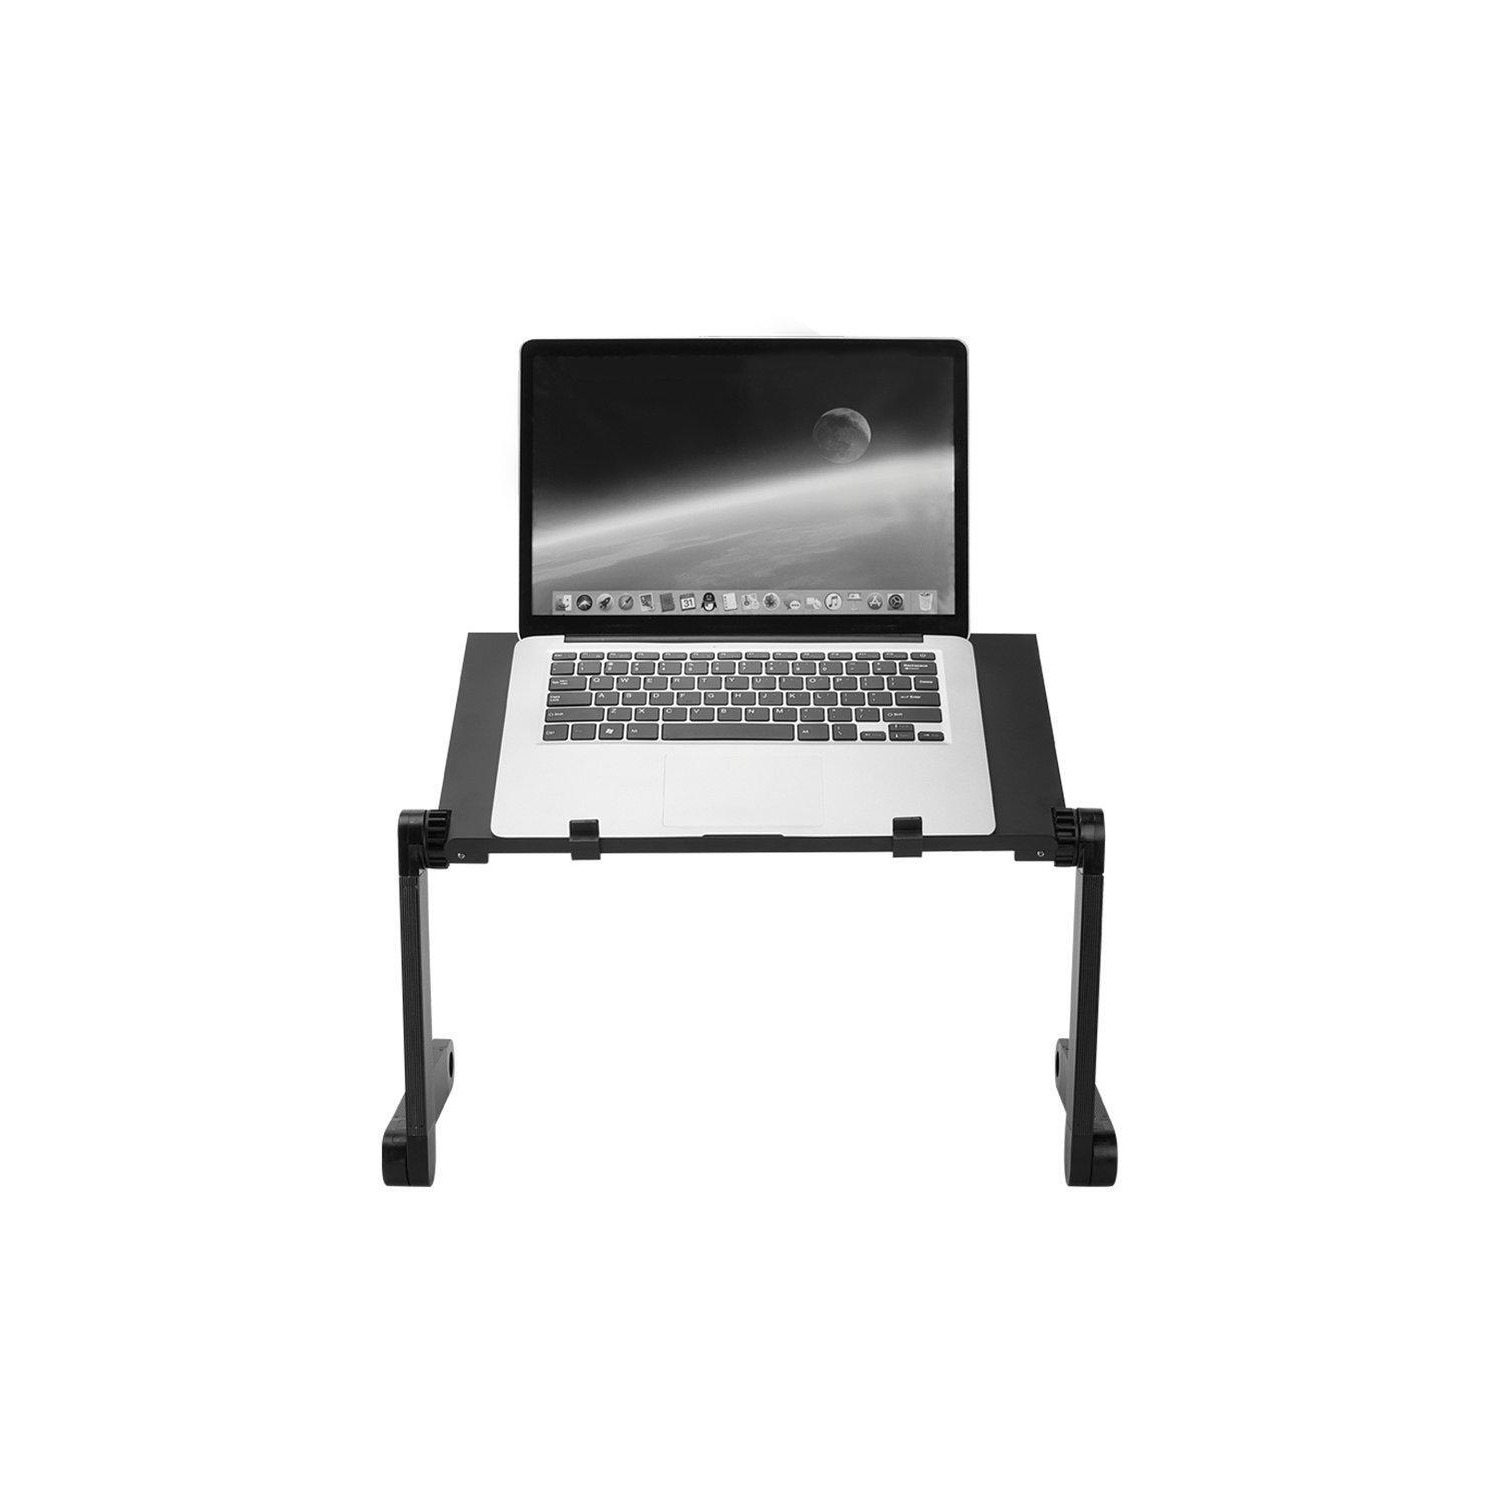 Adjustable Laptop Vented Table Computer Stand - image 1